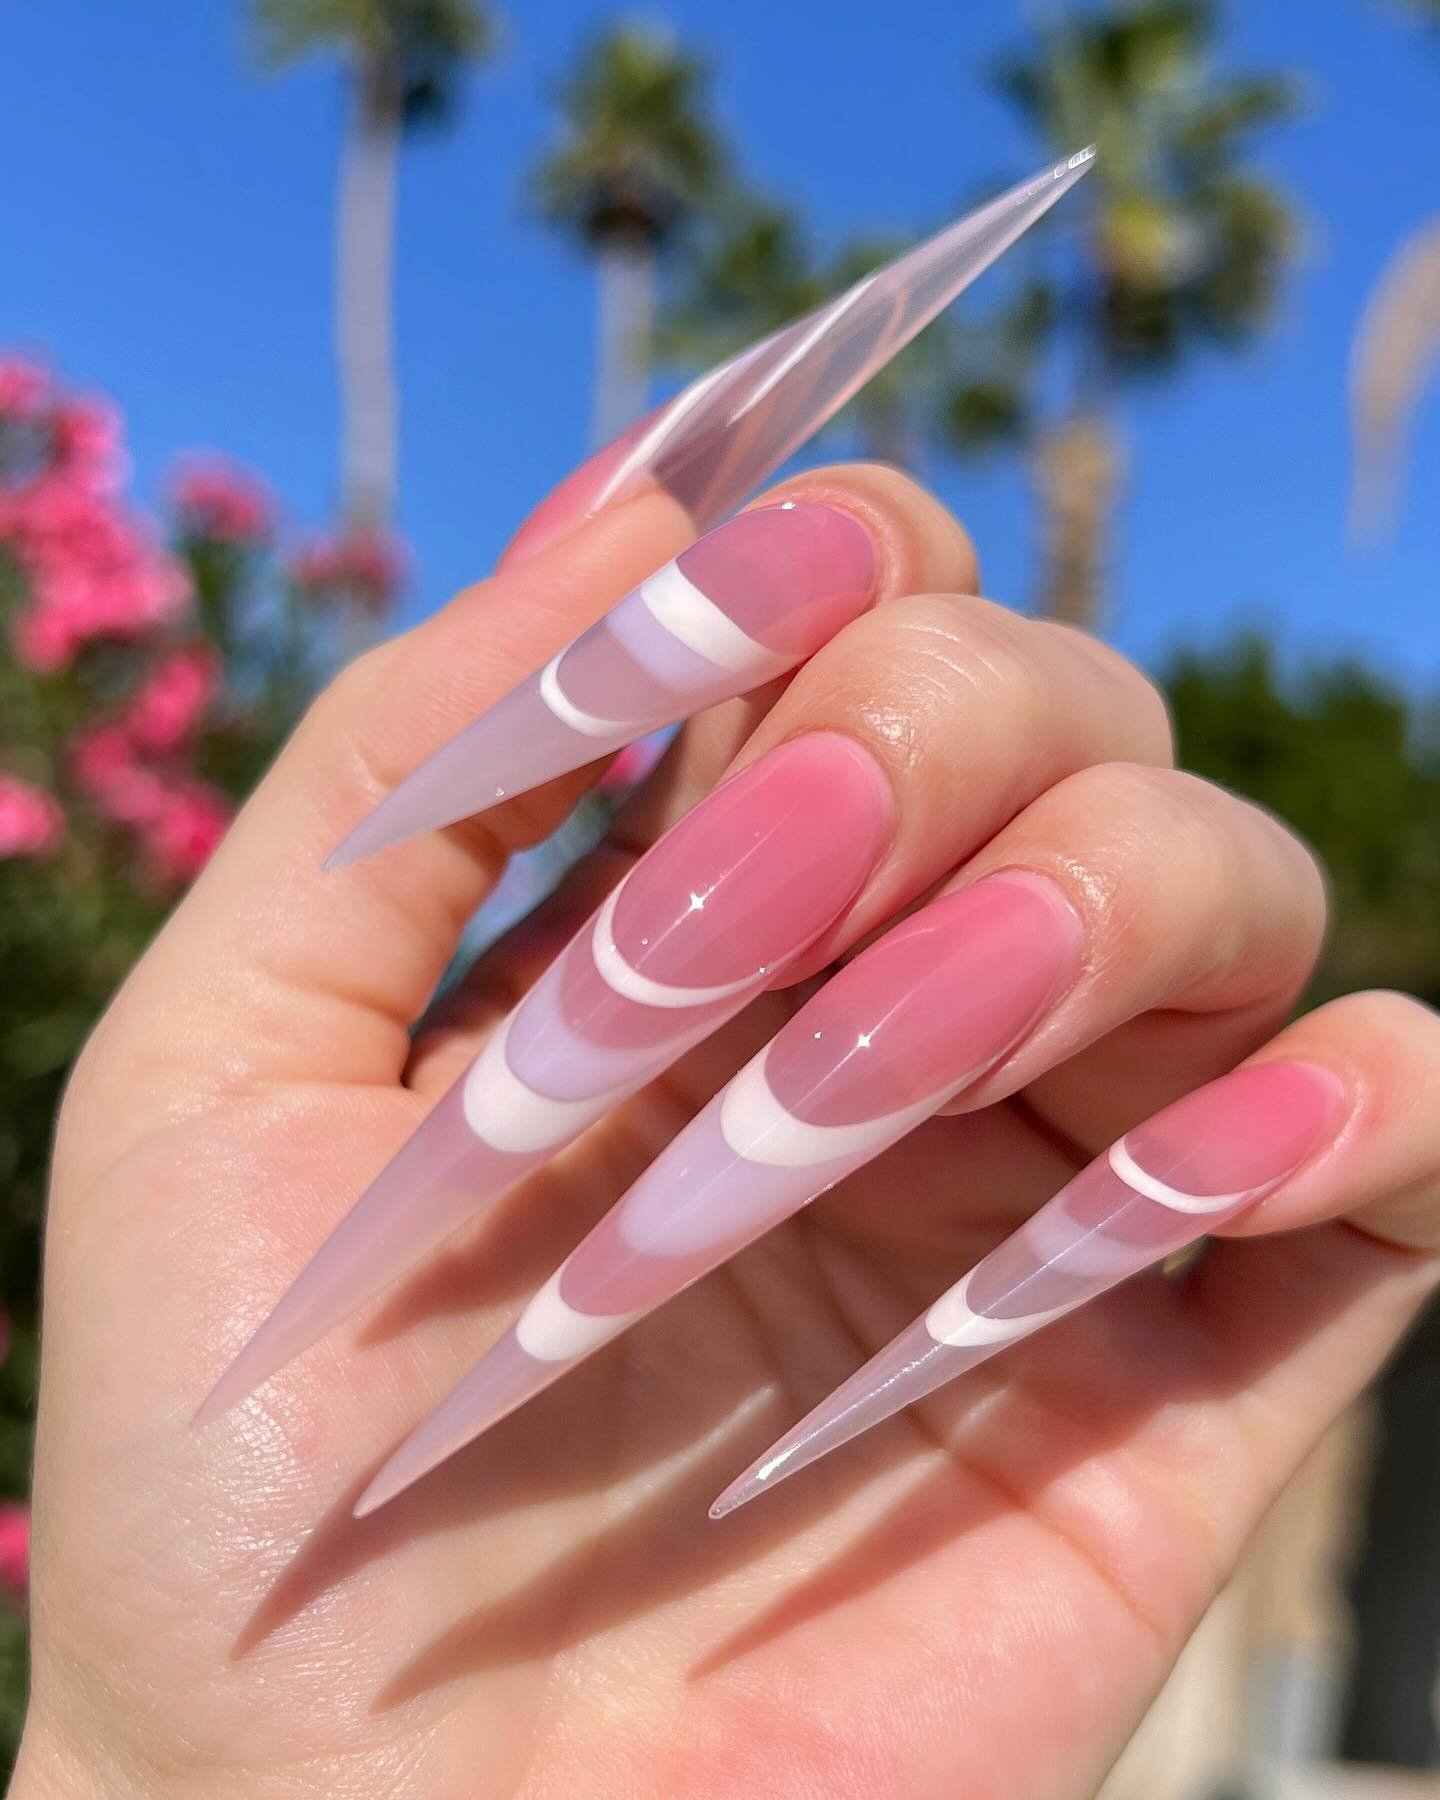 24 - Picture of Acrylic Nails